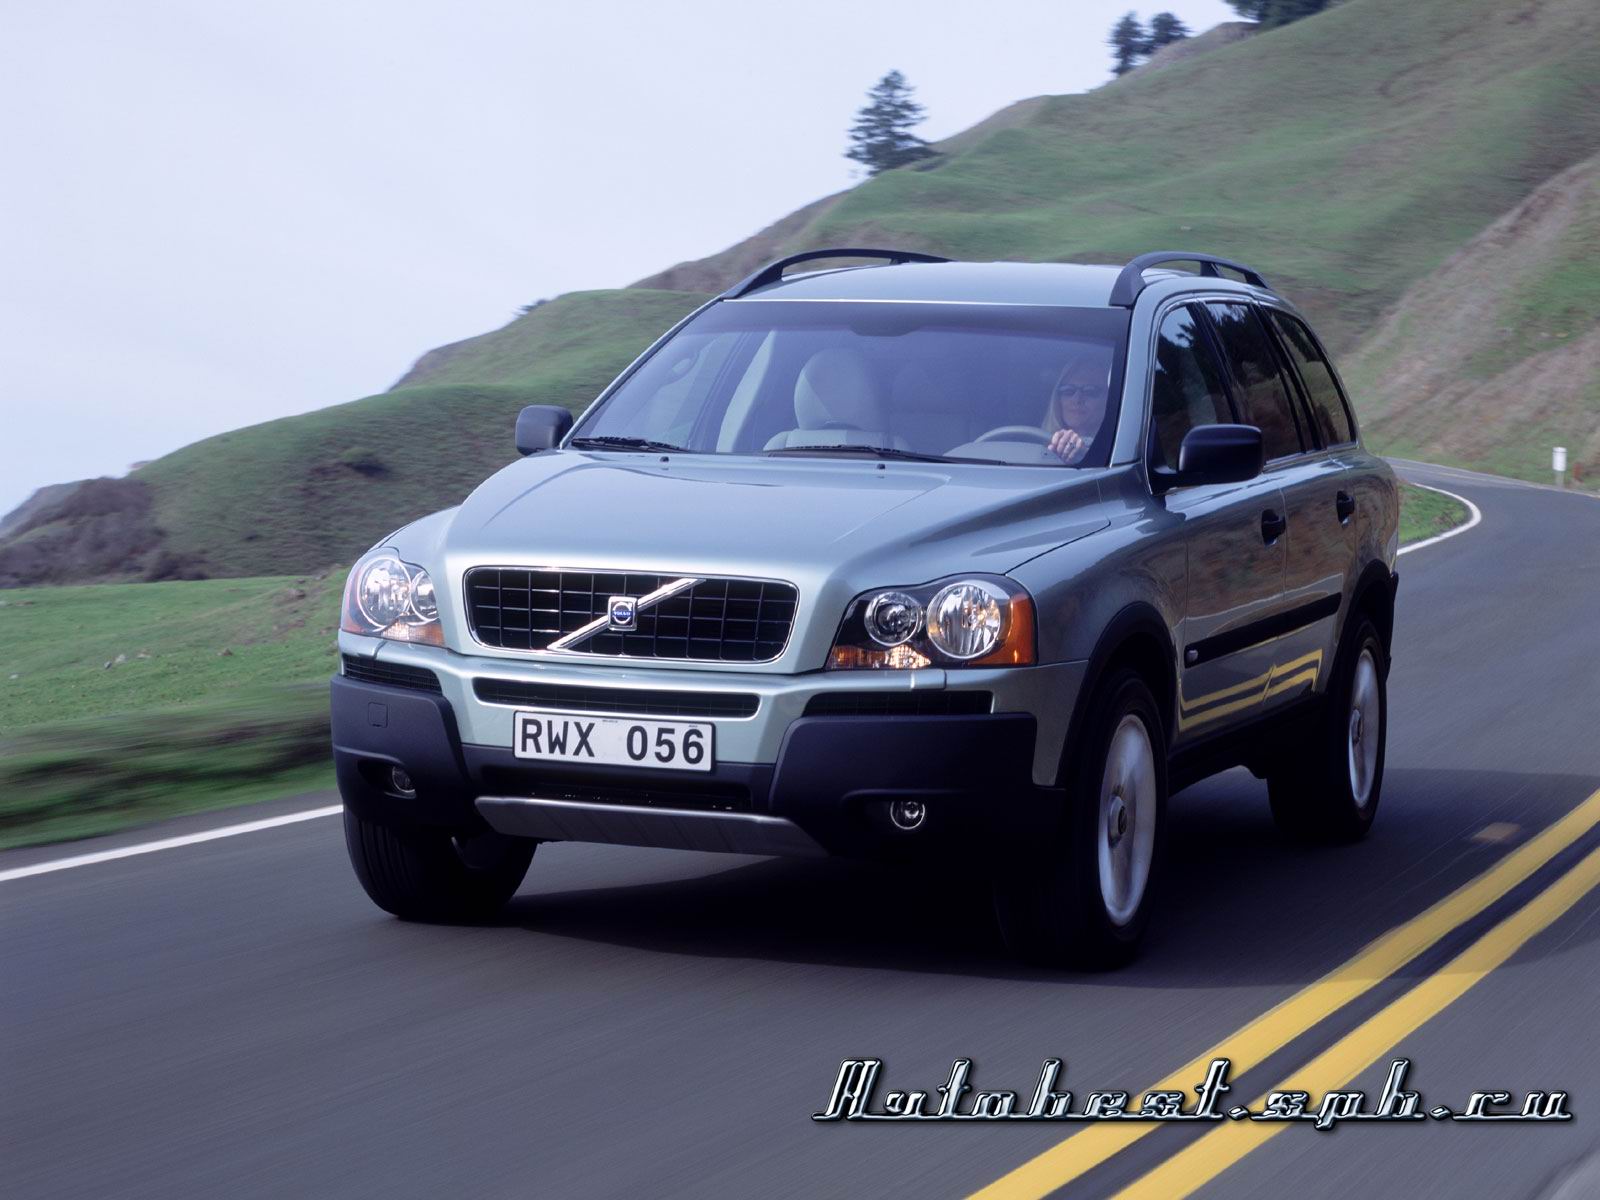 Download full size Volvo wallpaper / Cars / 1600x1200